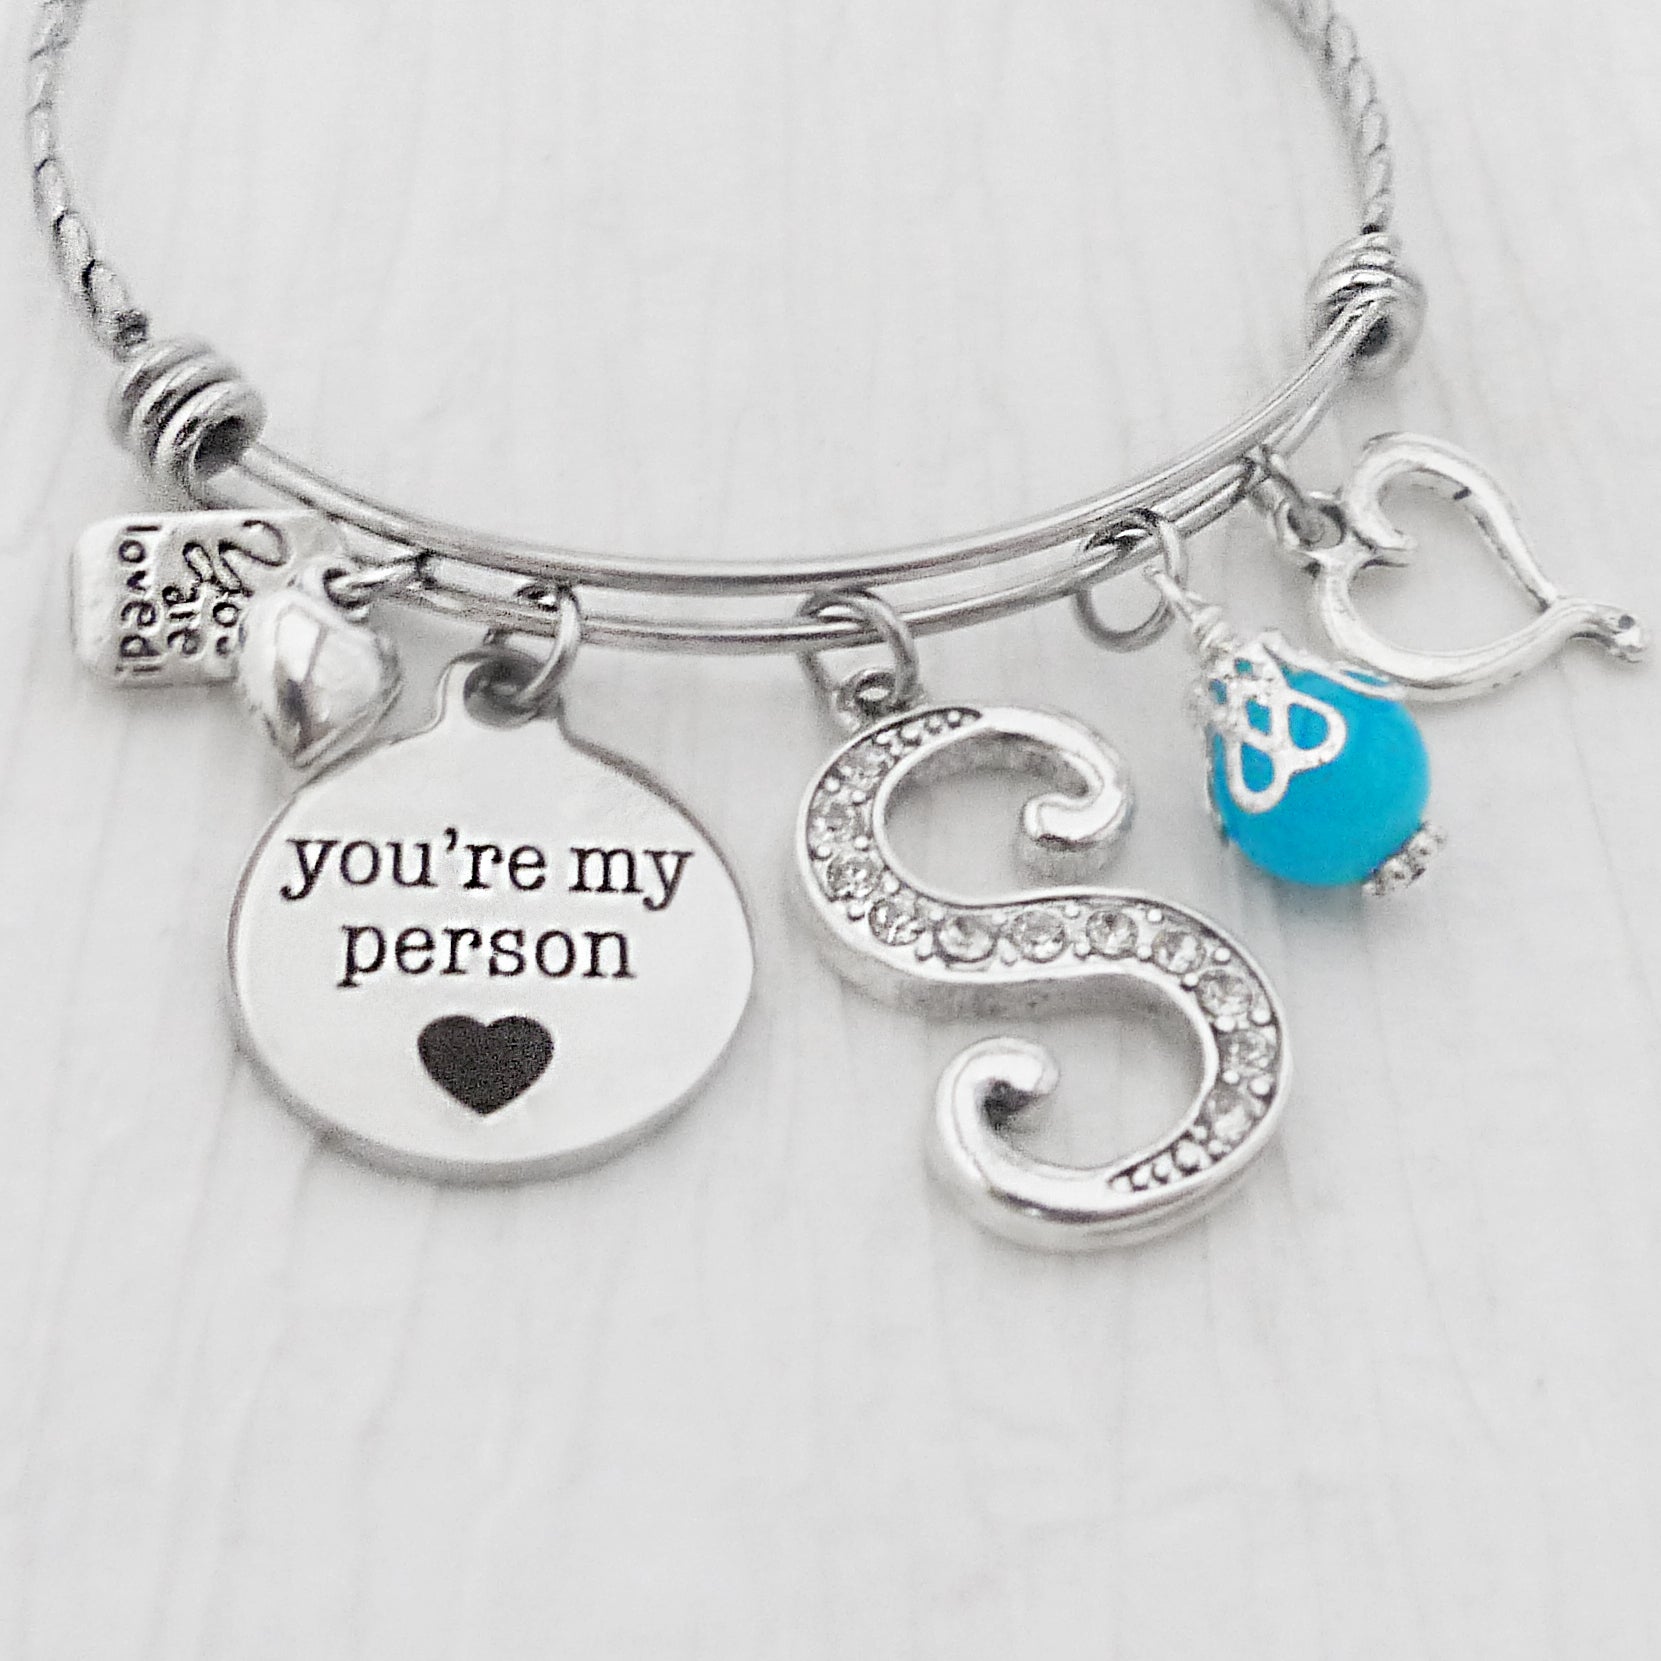 Friend Gifts- Personalized You're my person bangle bracelet, you are loved, heart